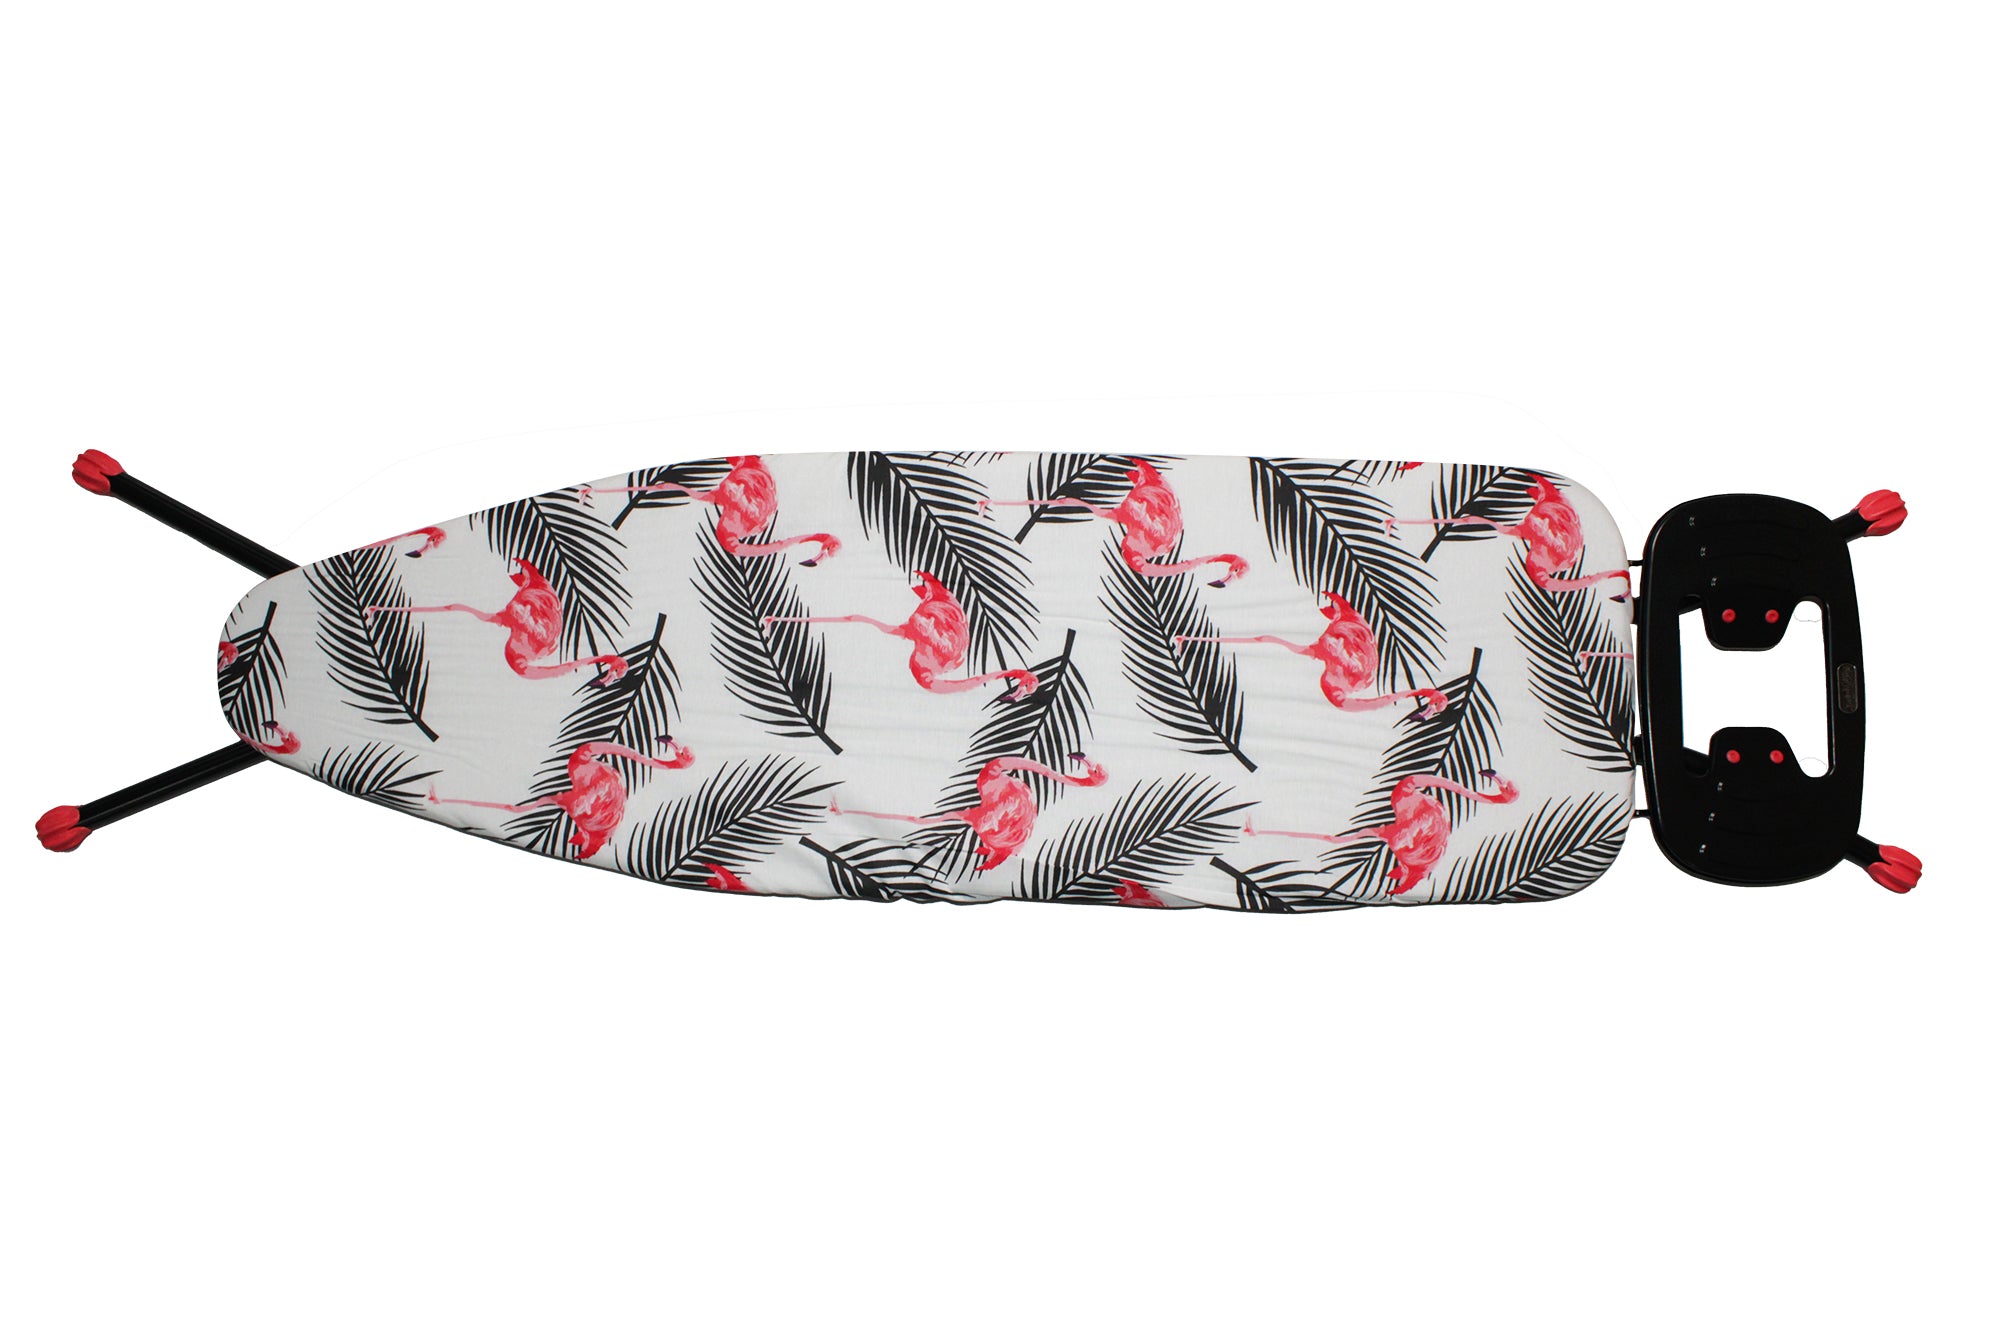 110x33cm Mesh Ironing Board with Safety Iron Rest - Pink Flamingo